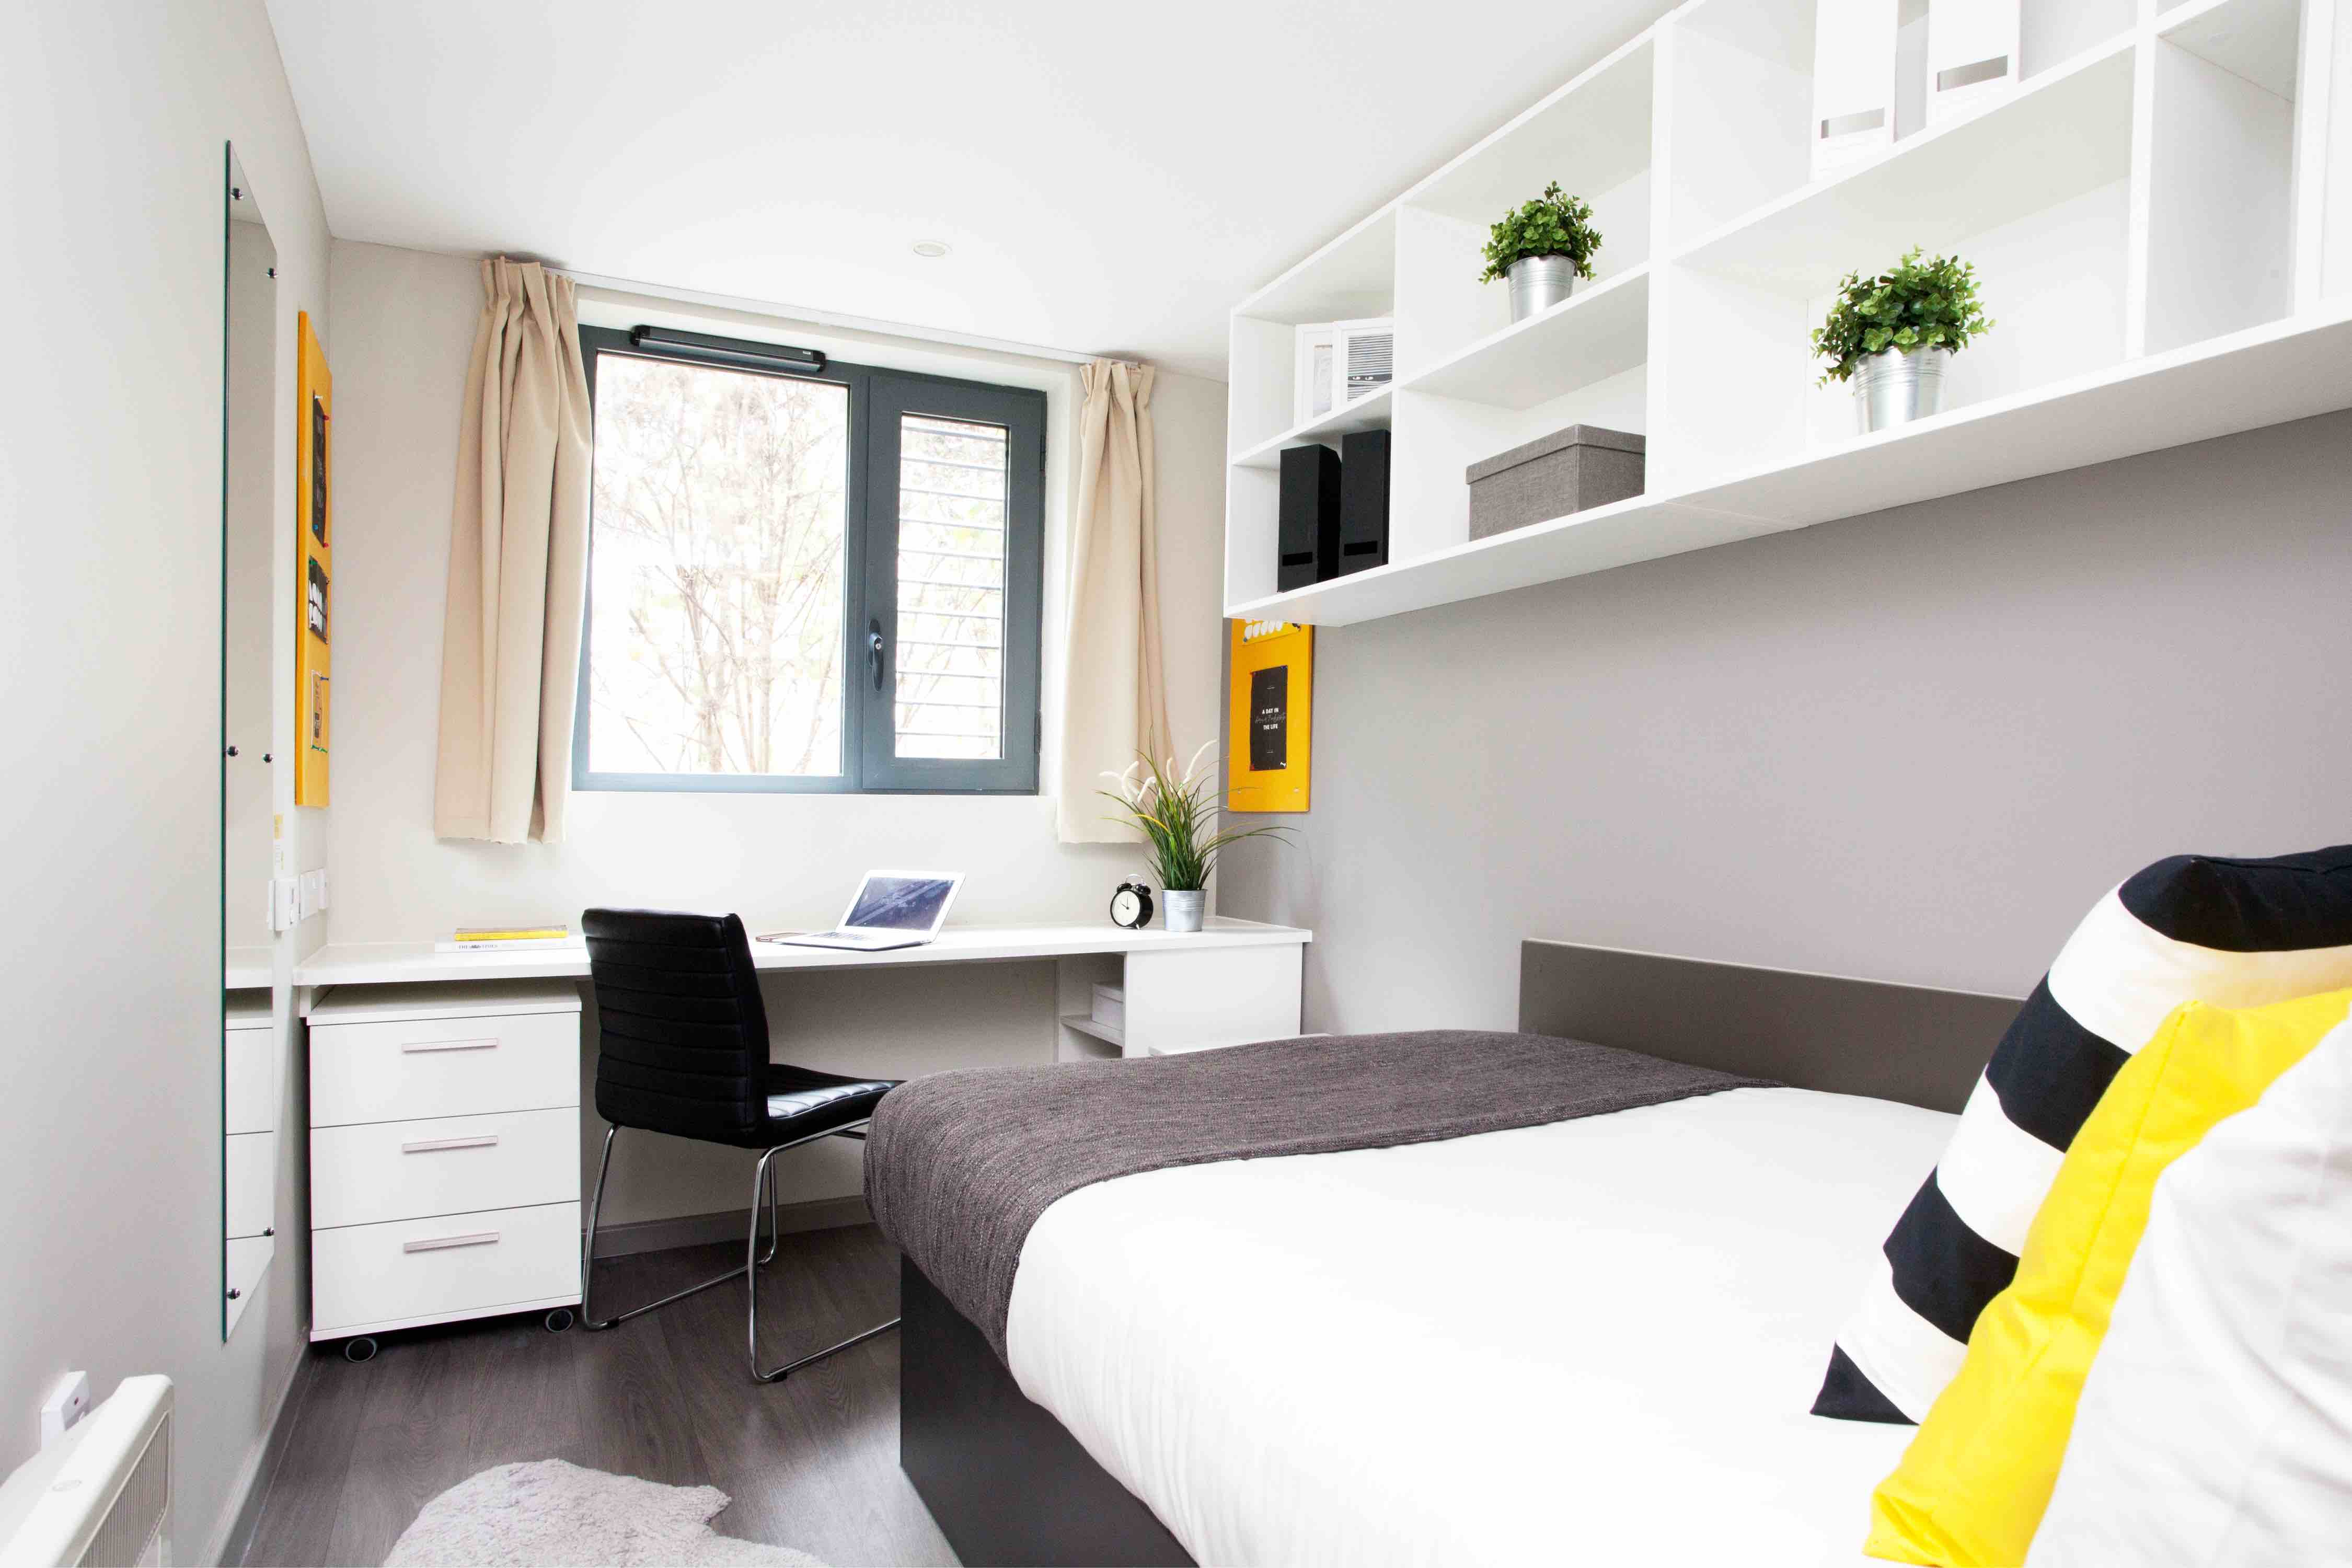 A bedroom in the University of Bristol Orchard Heights student housing in Bristol, England. Photo credit: Jim Johnston